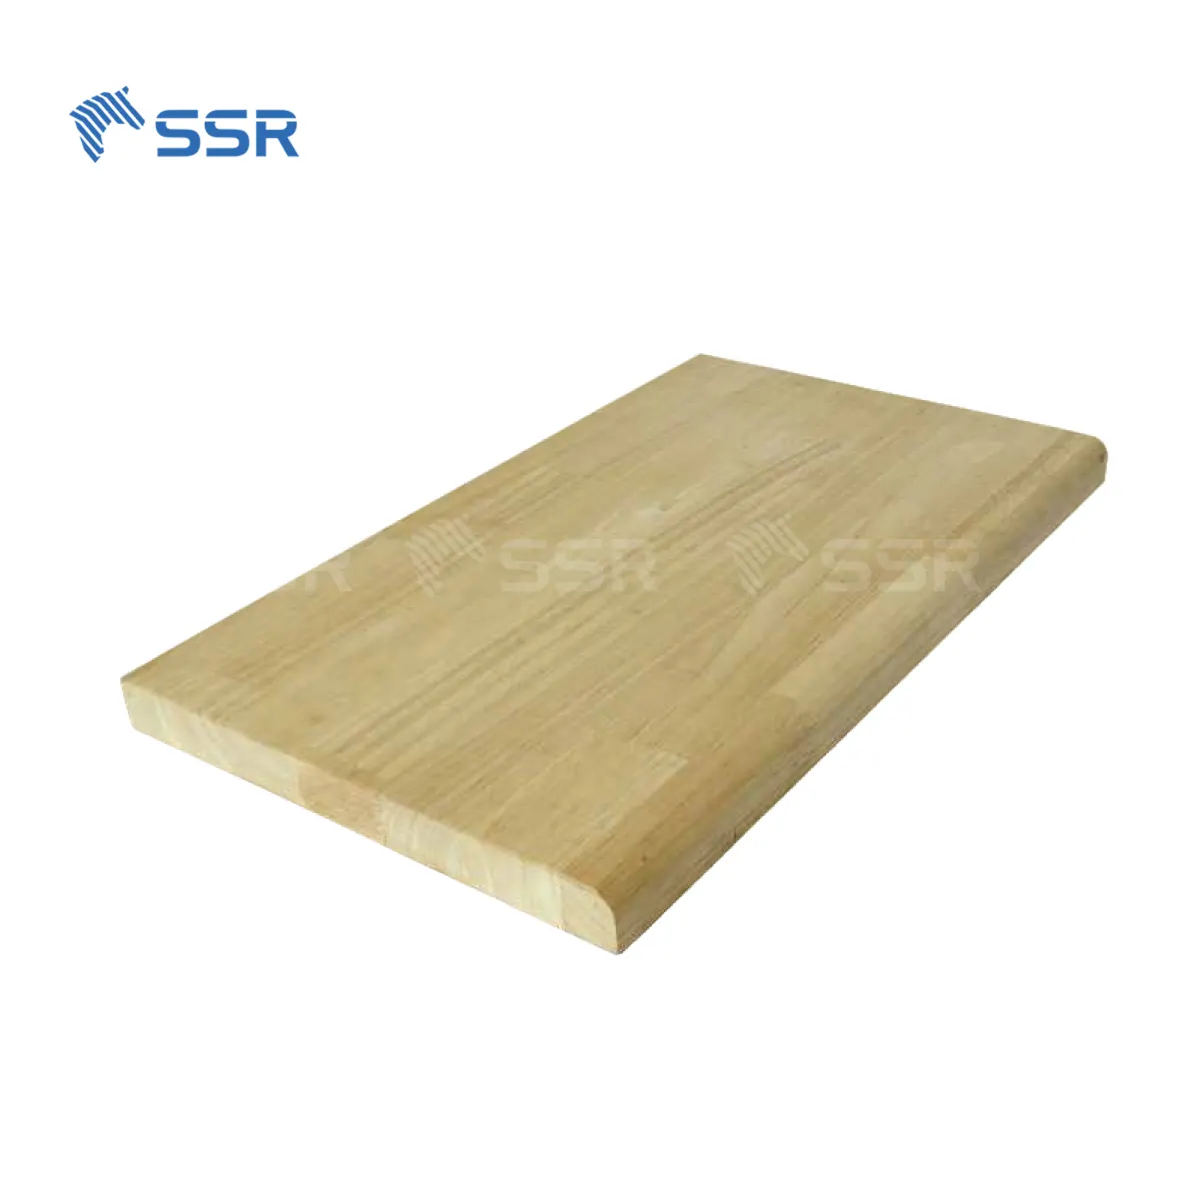 SSR VINA - Wood Stair Tread - Wooden Staircase Step Wood steps stair treads